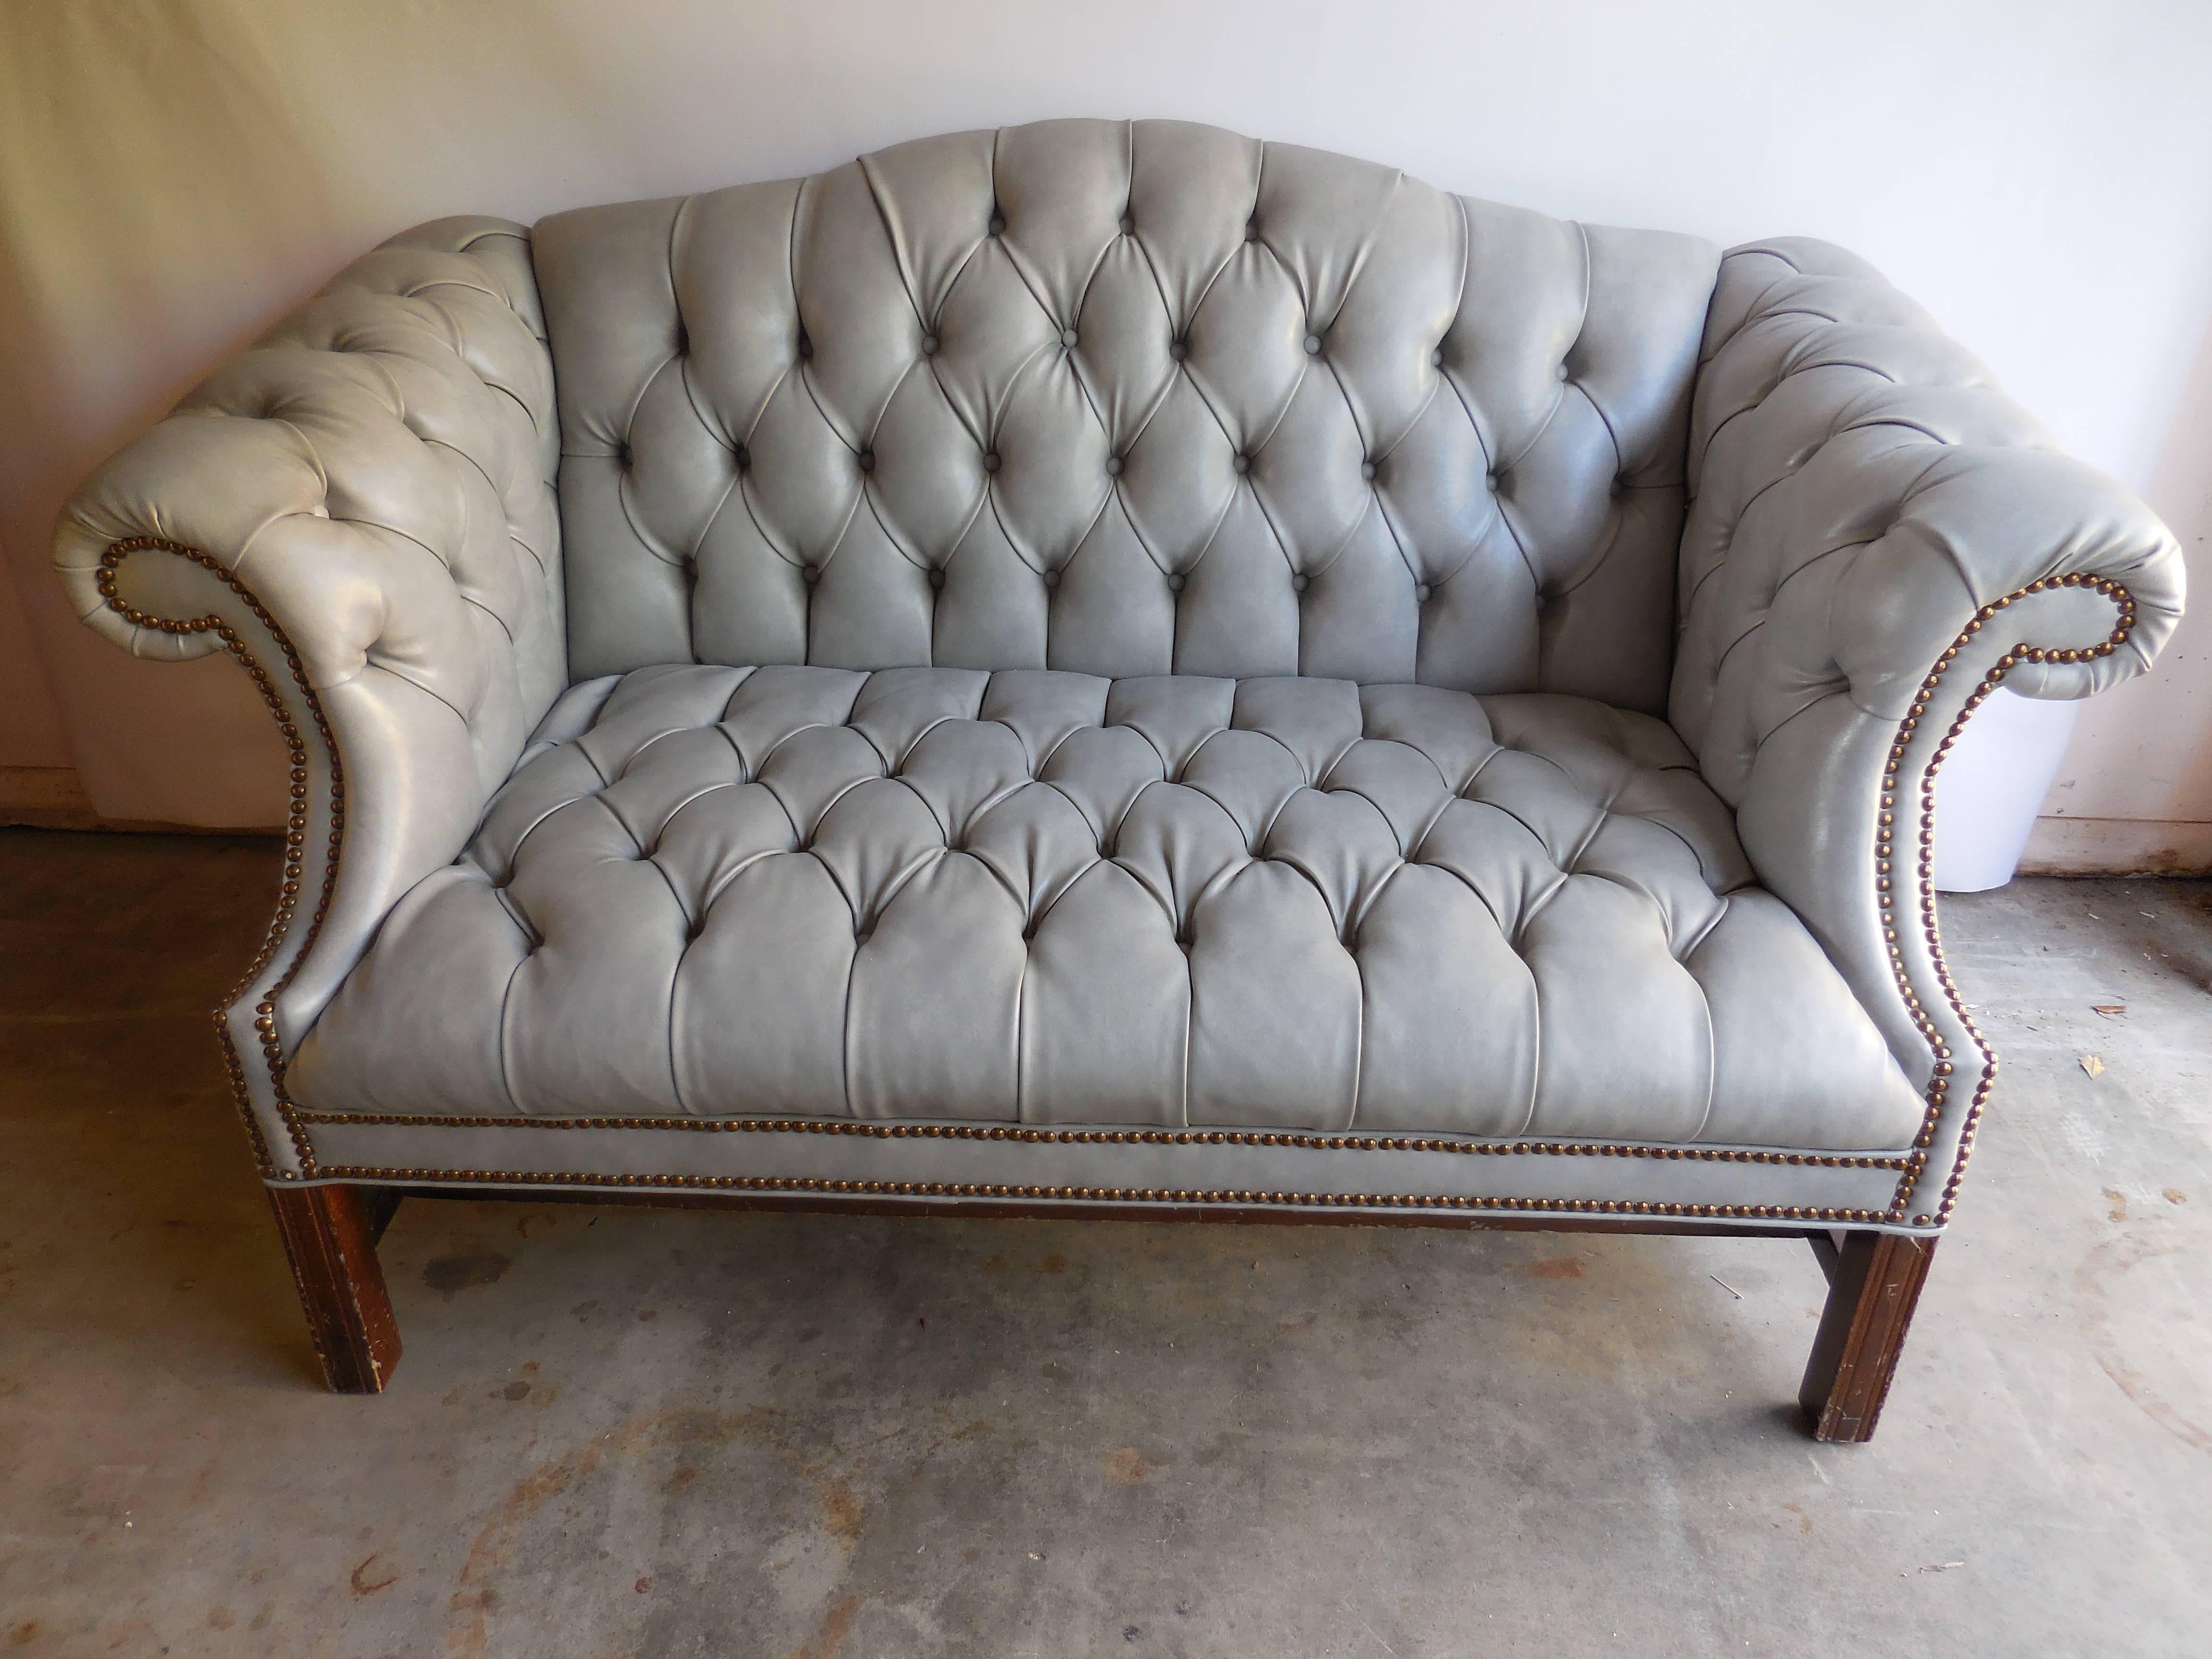 Chippendale tufted leather settee with nailhead trim, circa 1950. In excellent condition.